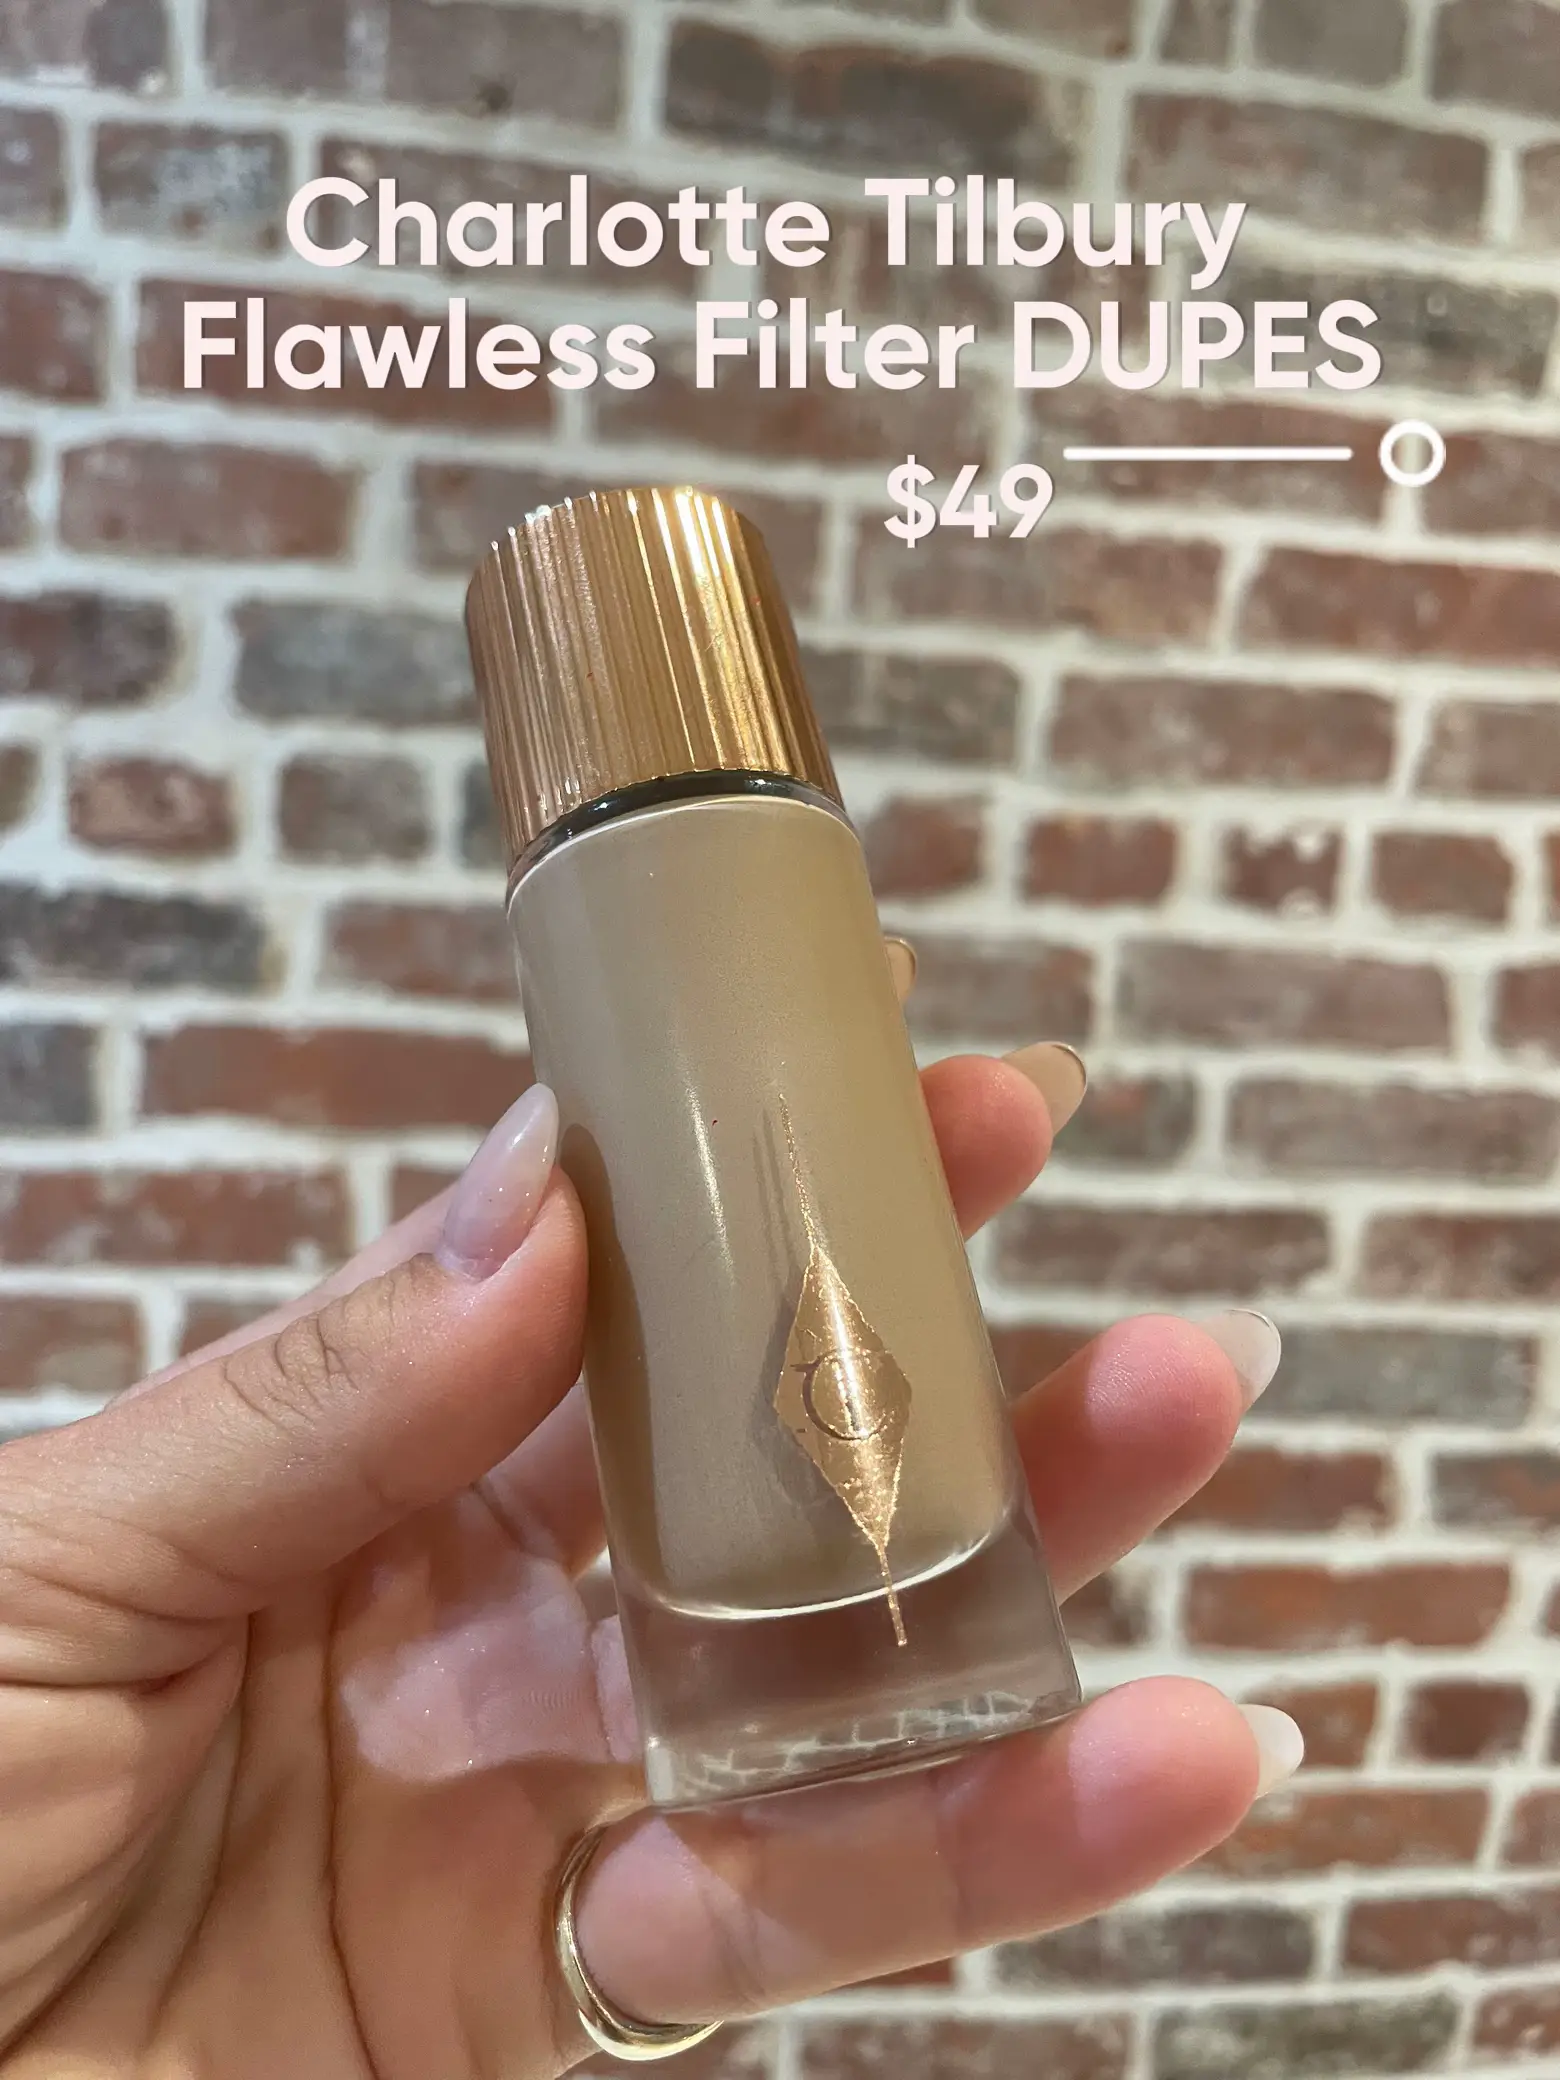 Charlotte Tilbury Flawless Filter Dupes!